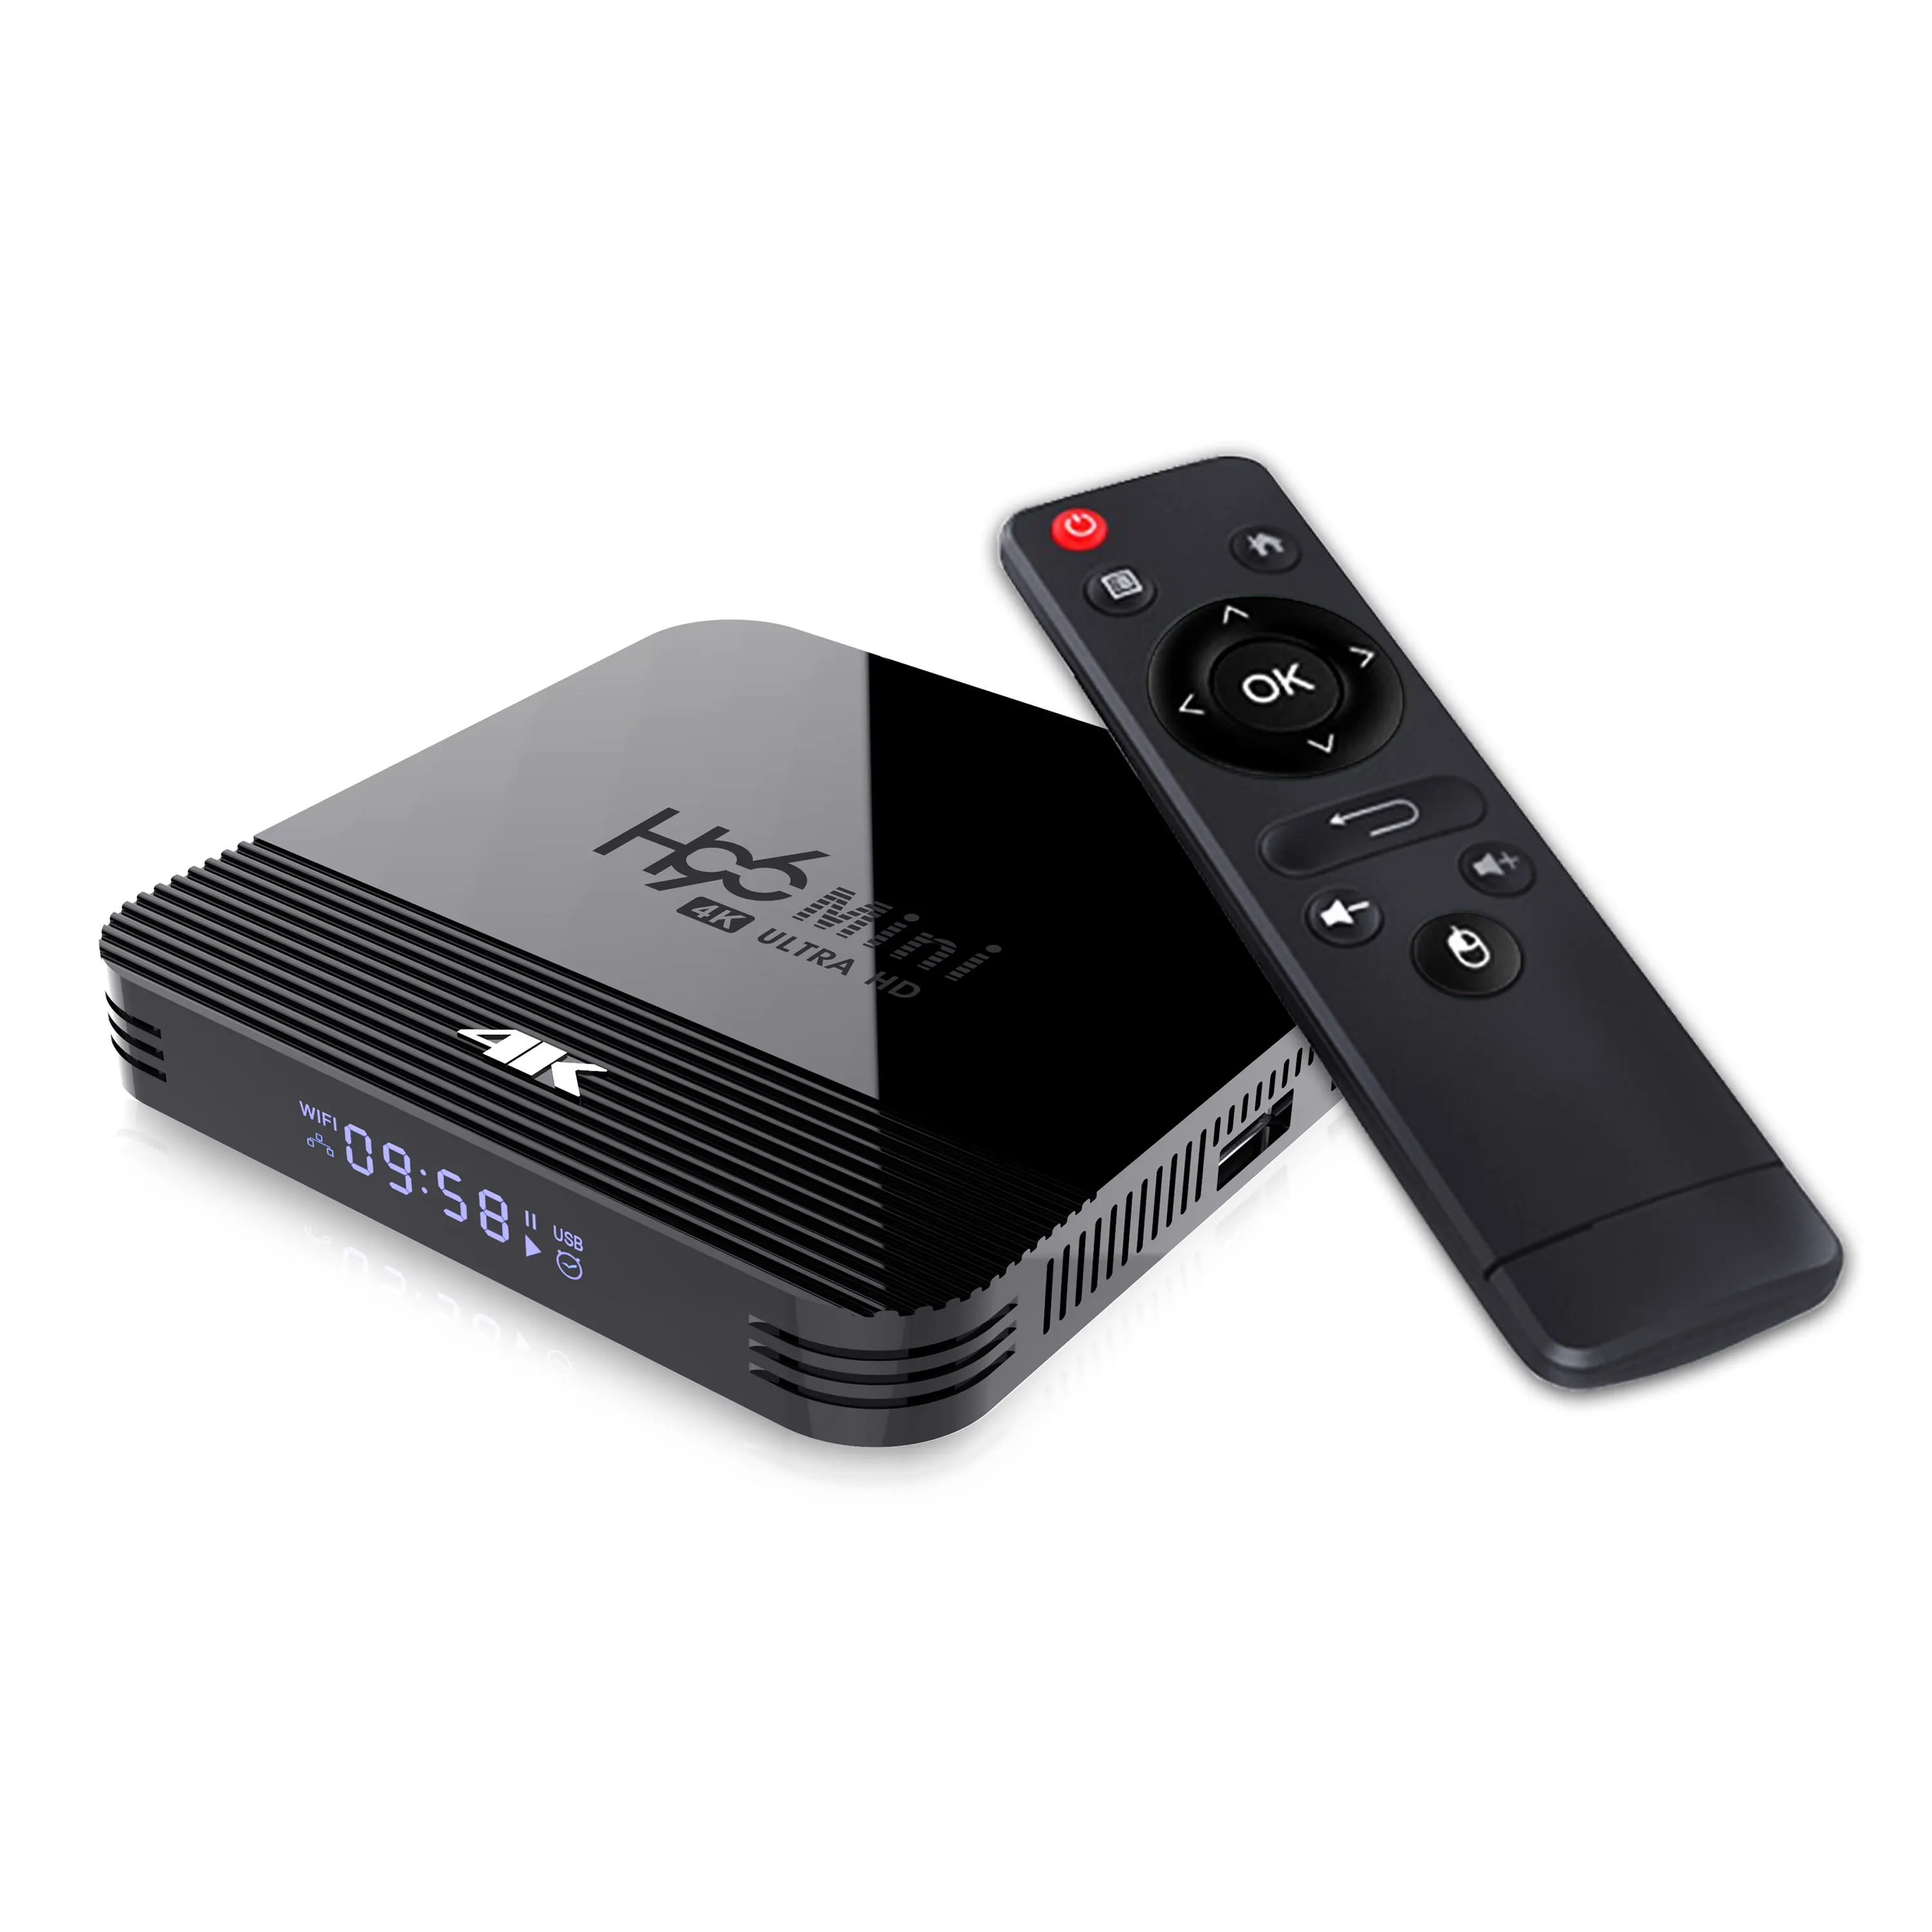 Cost-effective customize software download android smart internet tv free to air cable set top box H96 mini h8